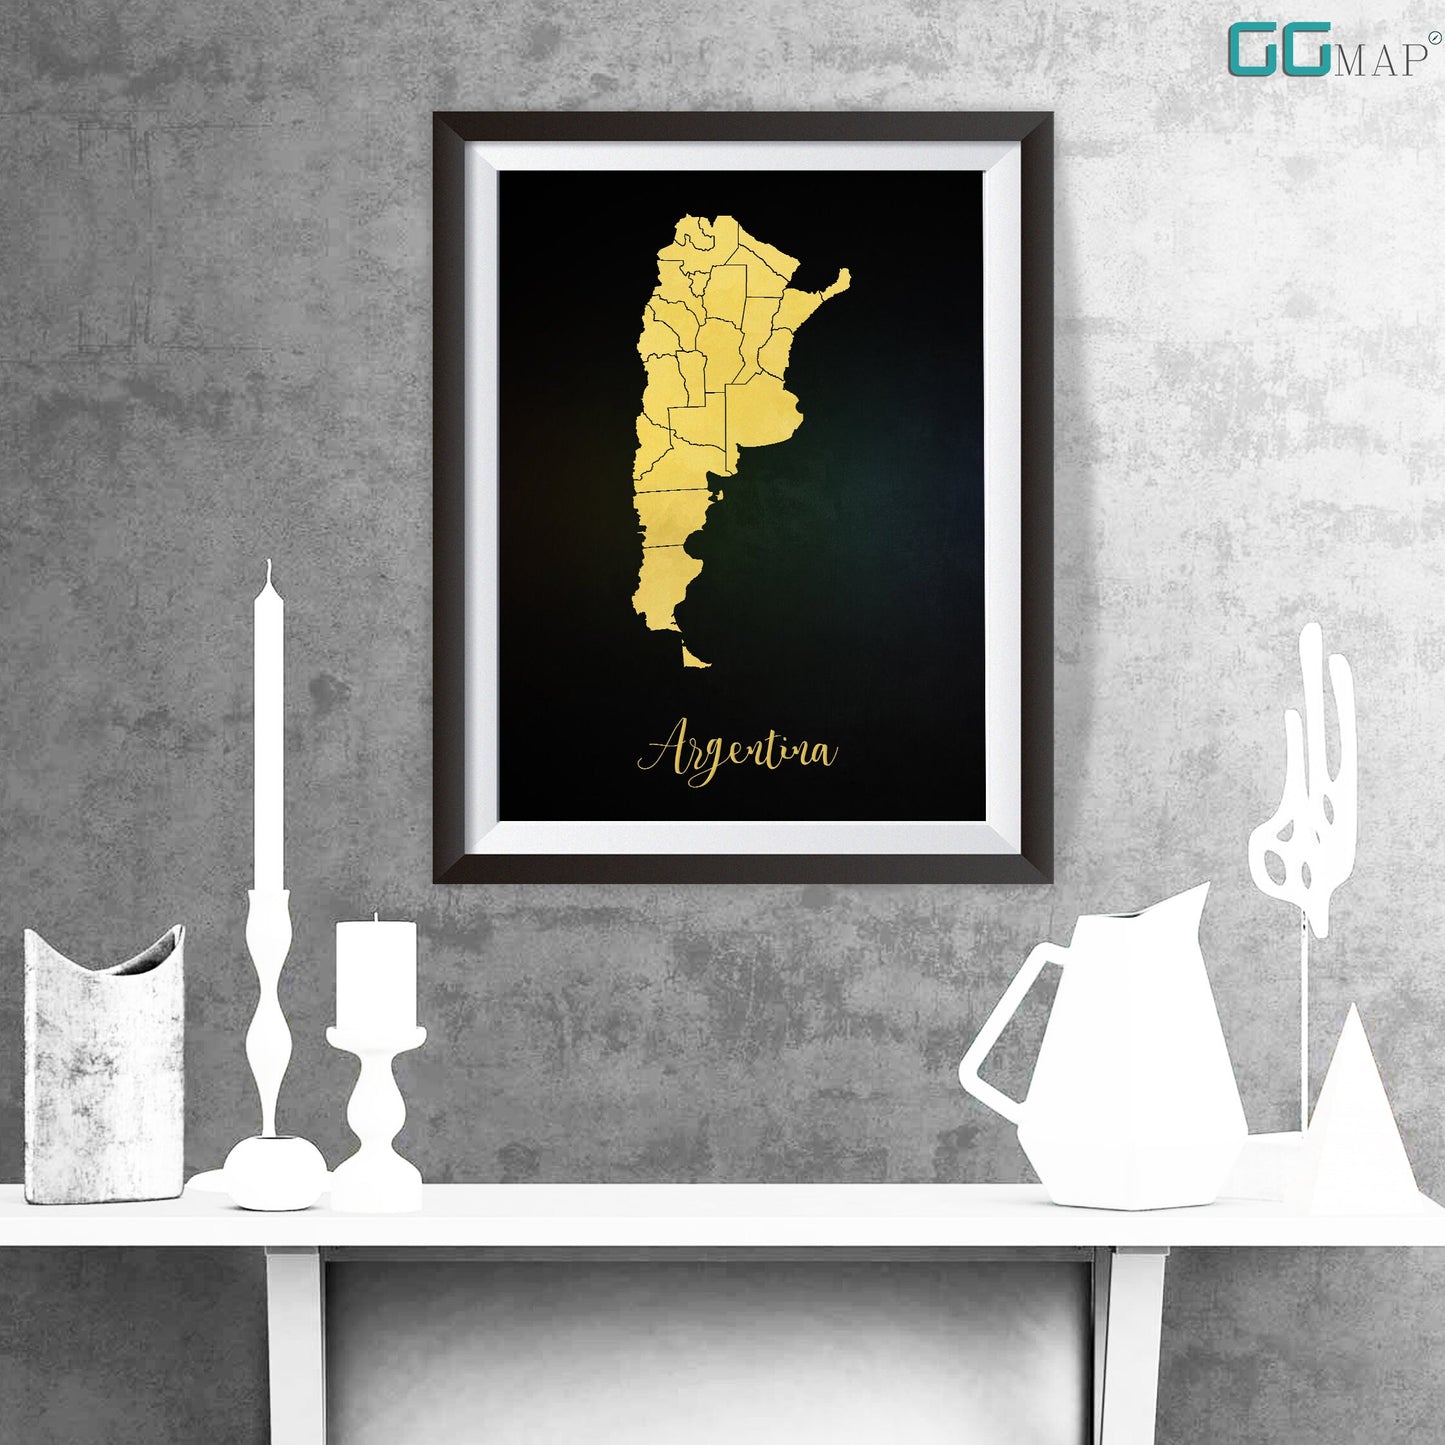 ARGENTINA map - Argentina gold map - Travel poster - Home Decor - Wall decor - Office map - Argentina gift - GGmap - Argentina poster